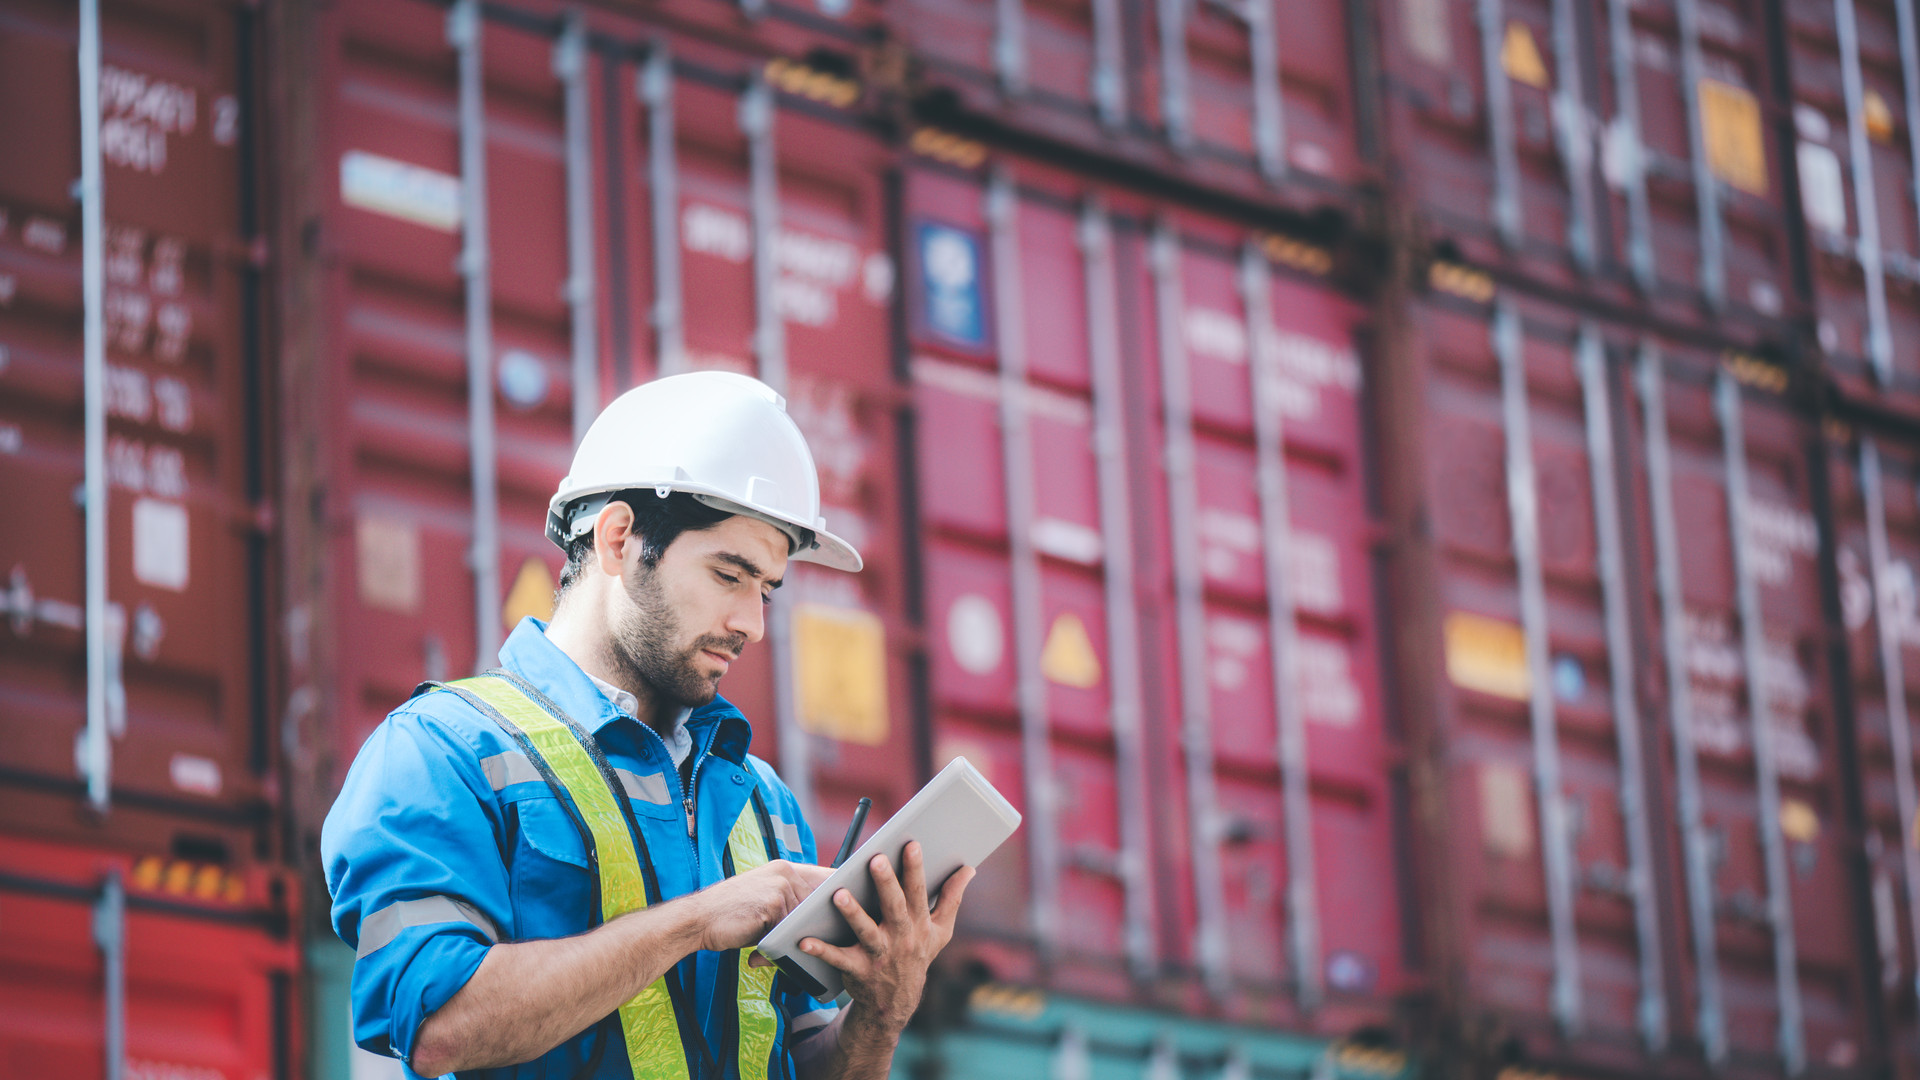 Man wears hardhat and reflection shirt and checking tablet with blurry metal containers in background. Concept of inventory and logistic management.